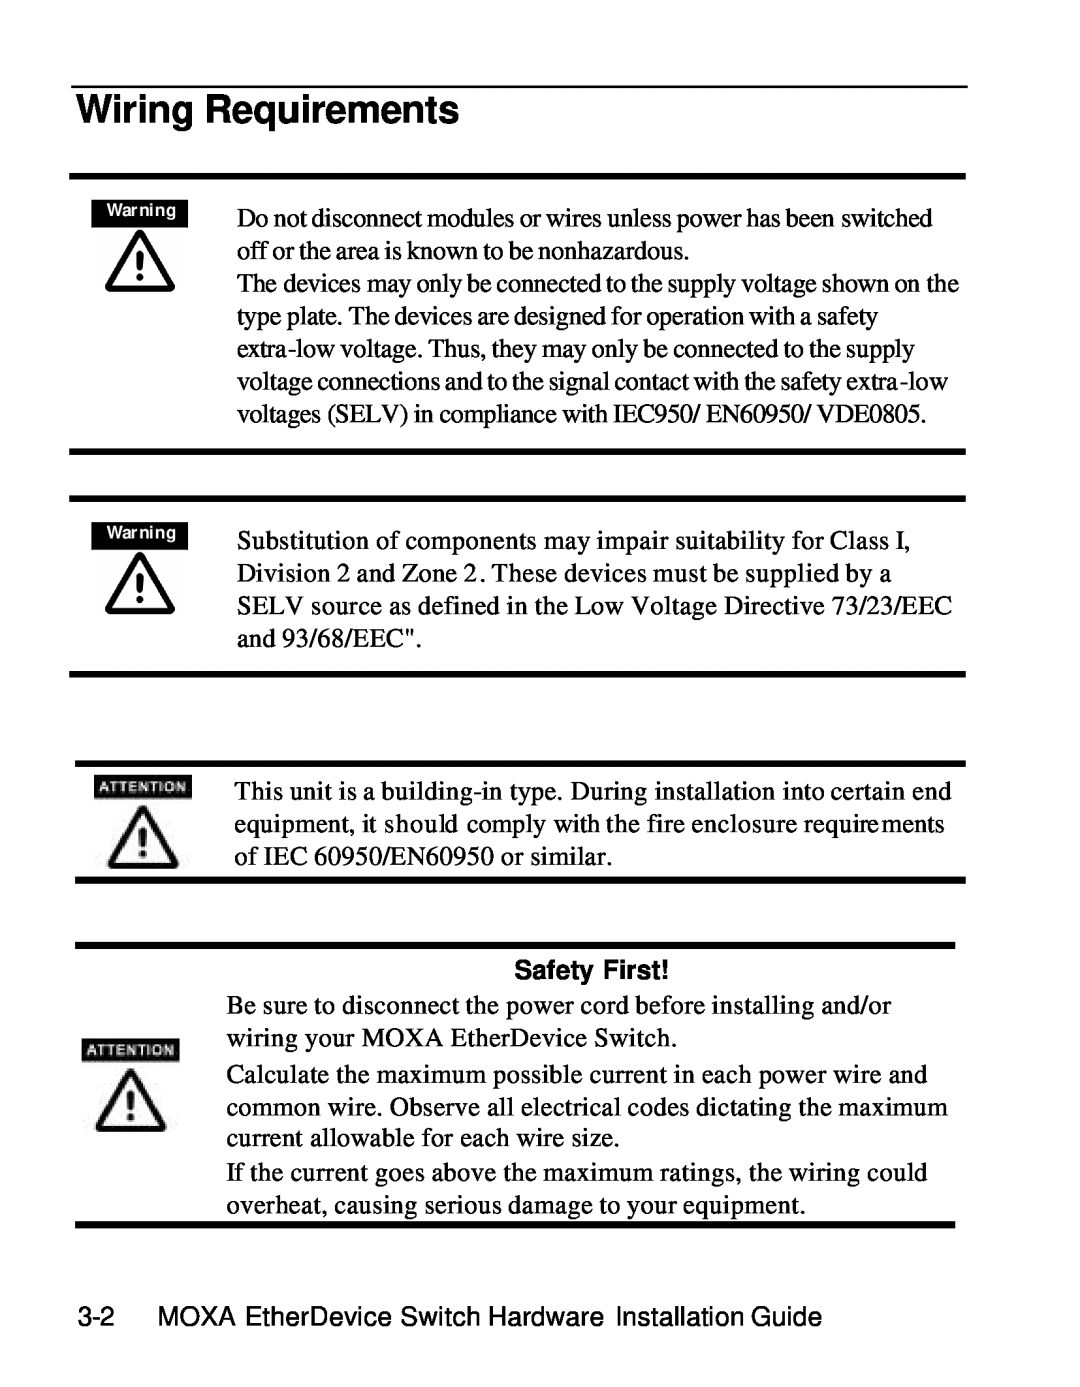 Moxa Technologies EDS-508 manual Wiring Requirements, Safety First 